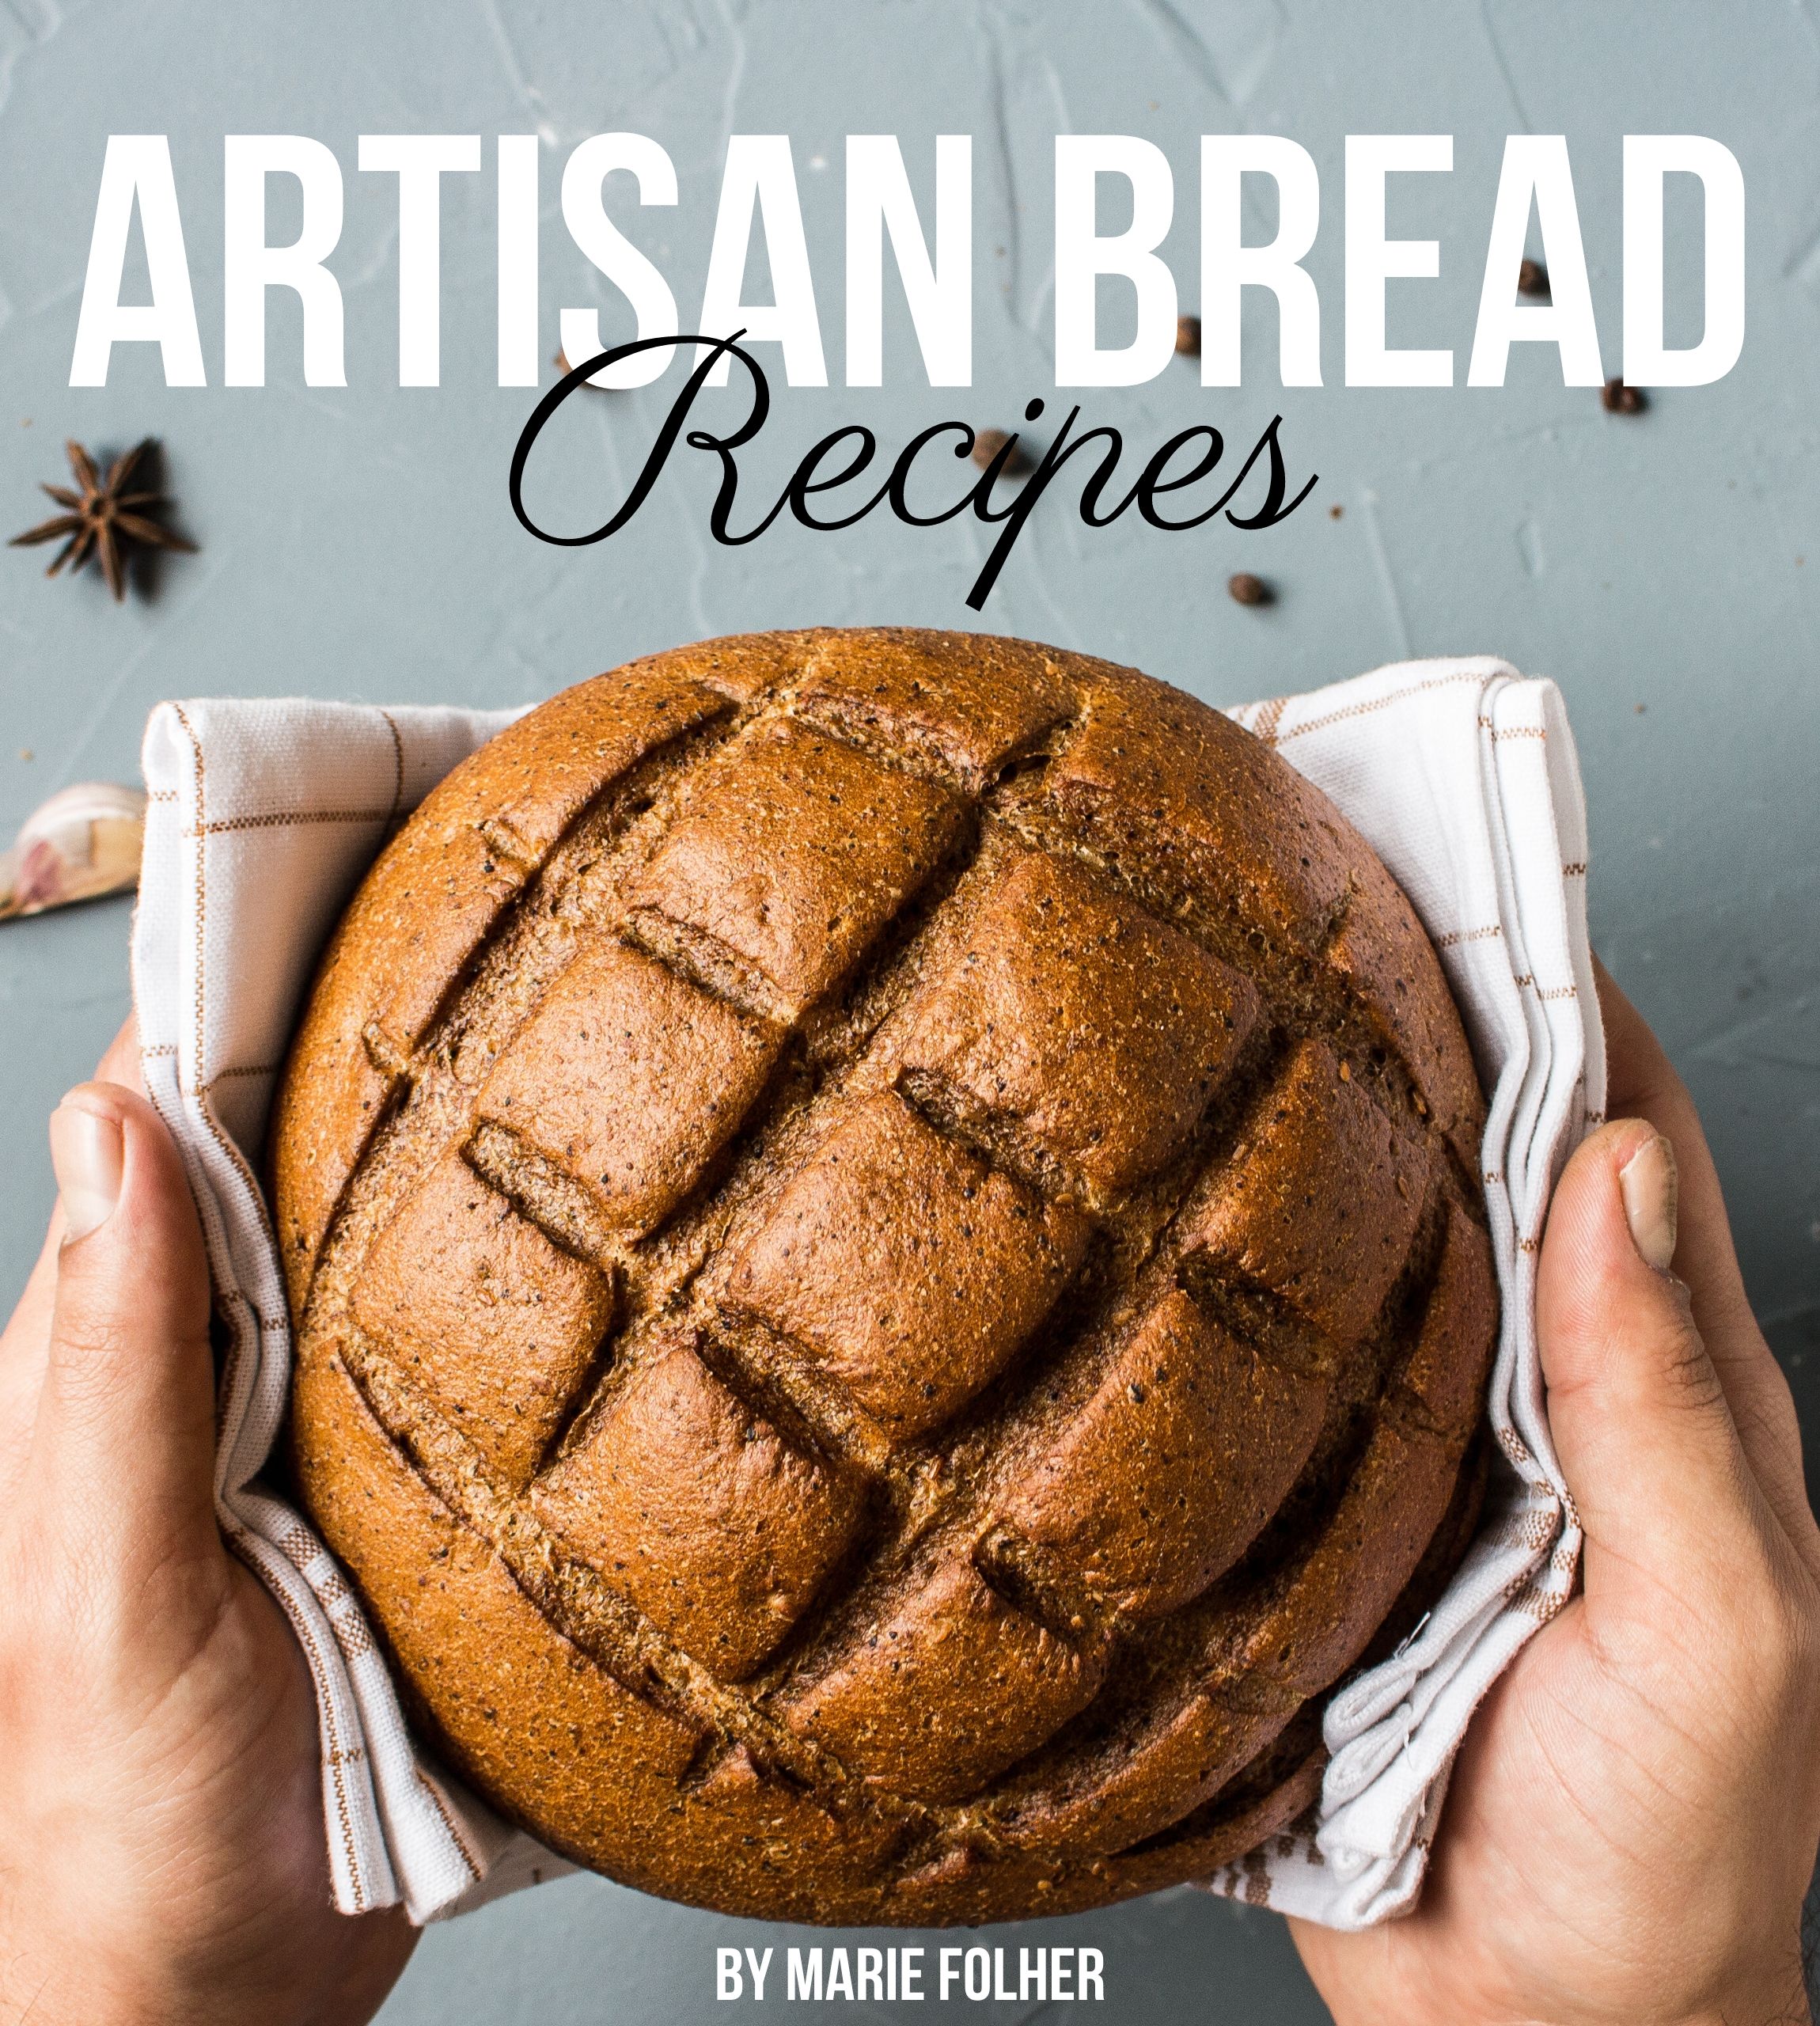 FREE: Artisan Bread Recipes: Artisan Bread Cookbook Full of Easy, Simple And Mouthwatering Artisan Bread Recipes by Marie Folher